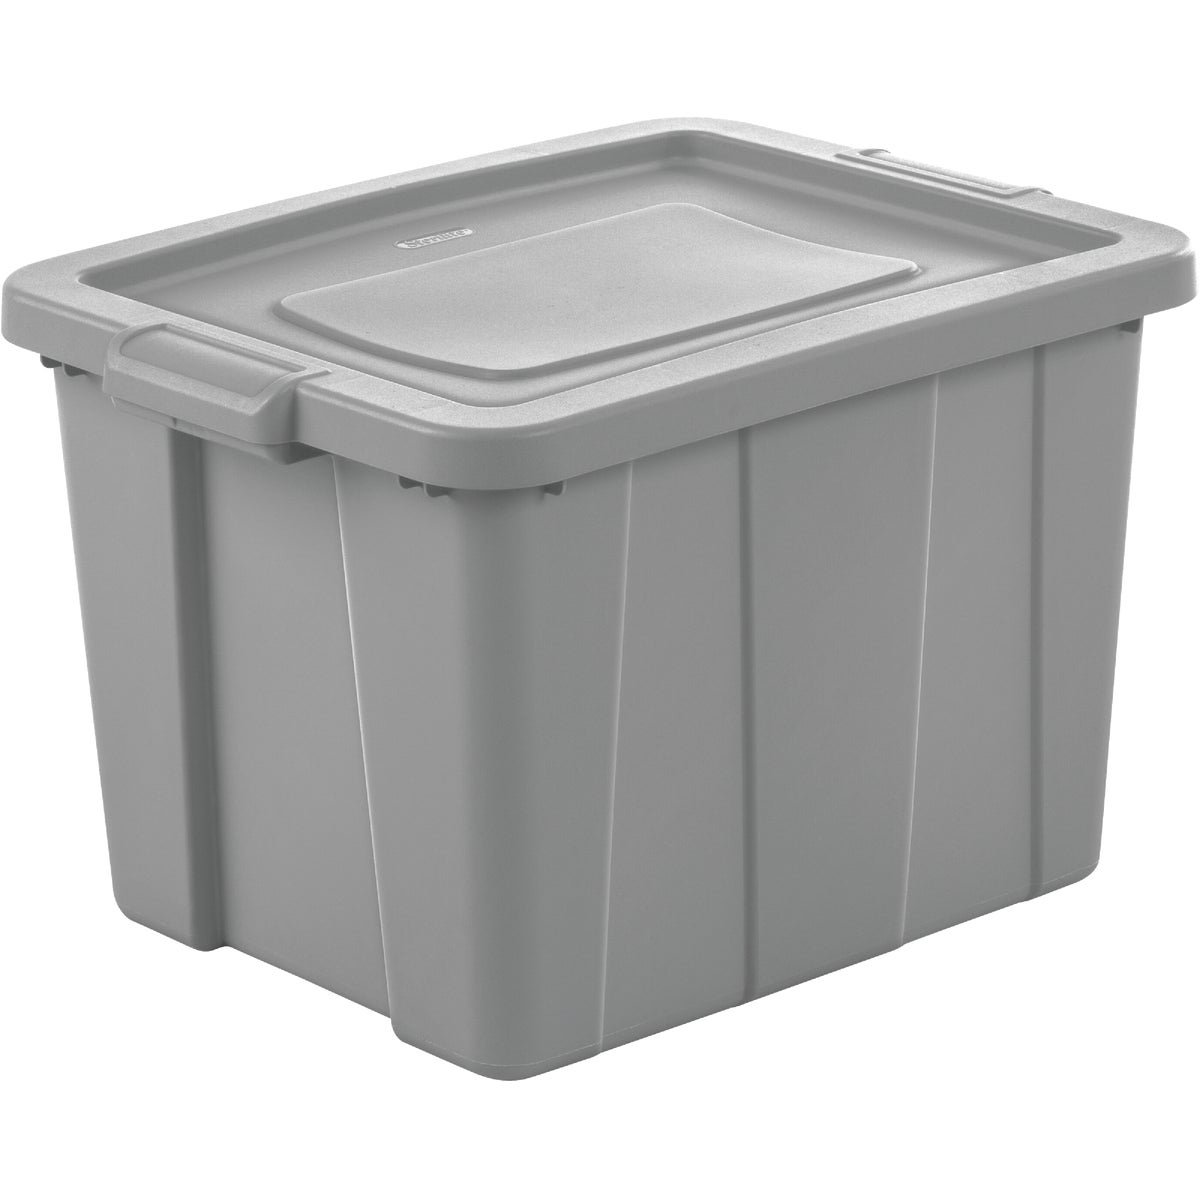 Sterilite Tuff1 18 Gal. Cement Tote with Handles